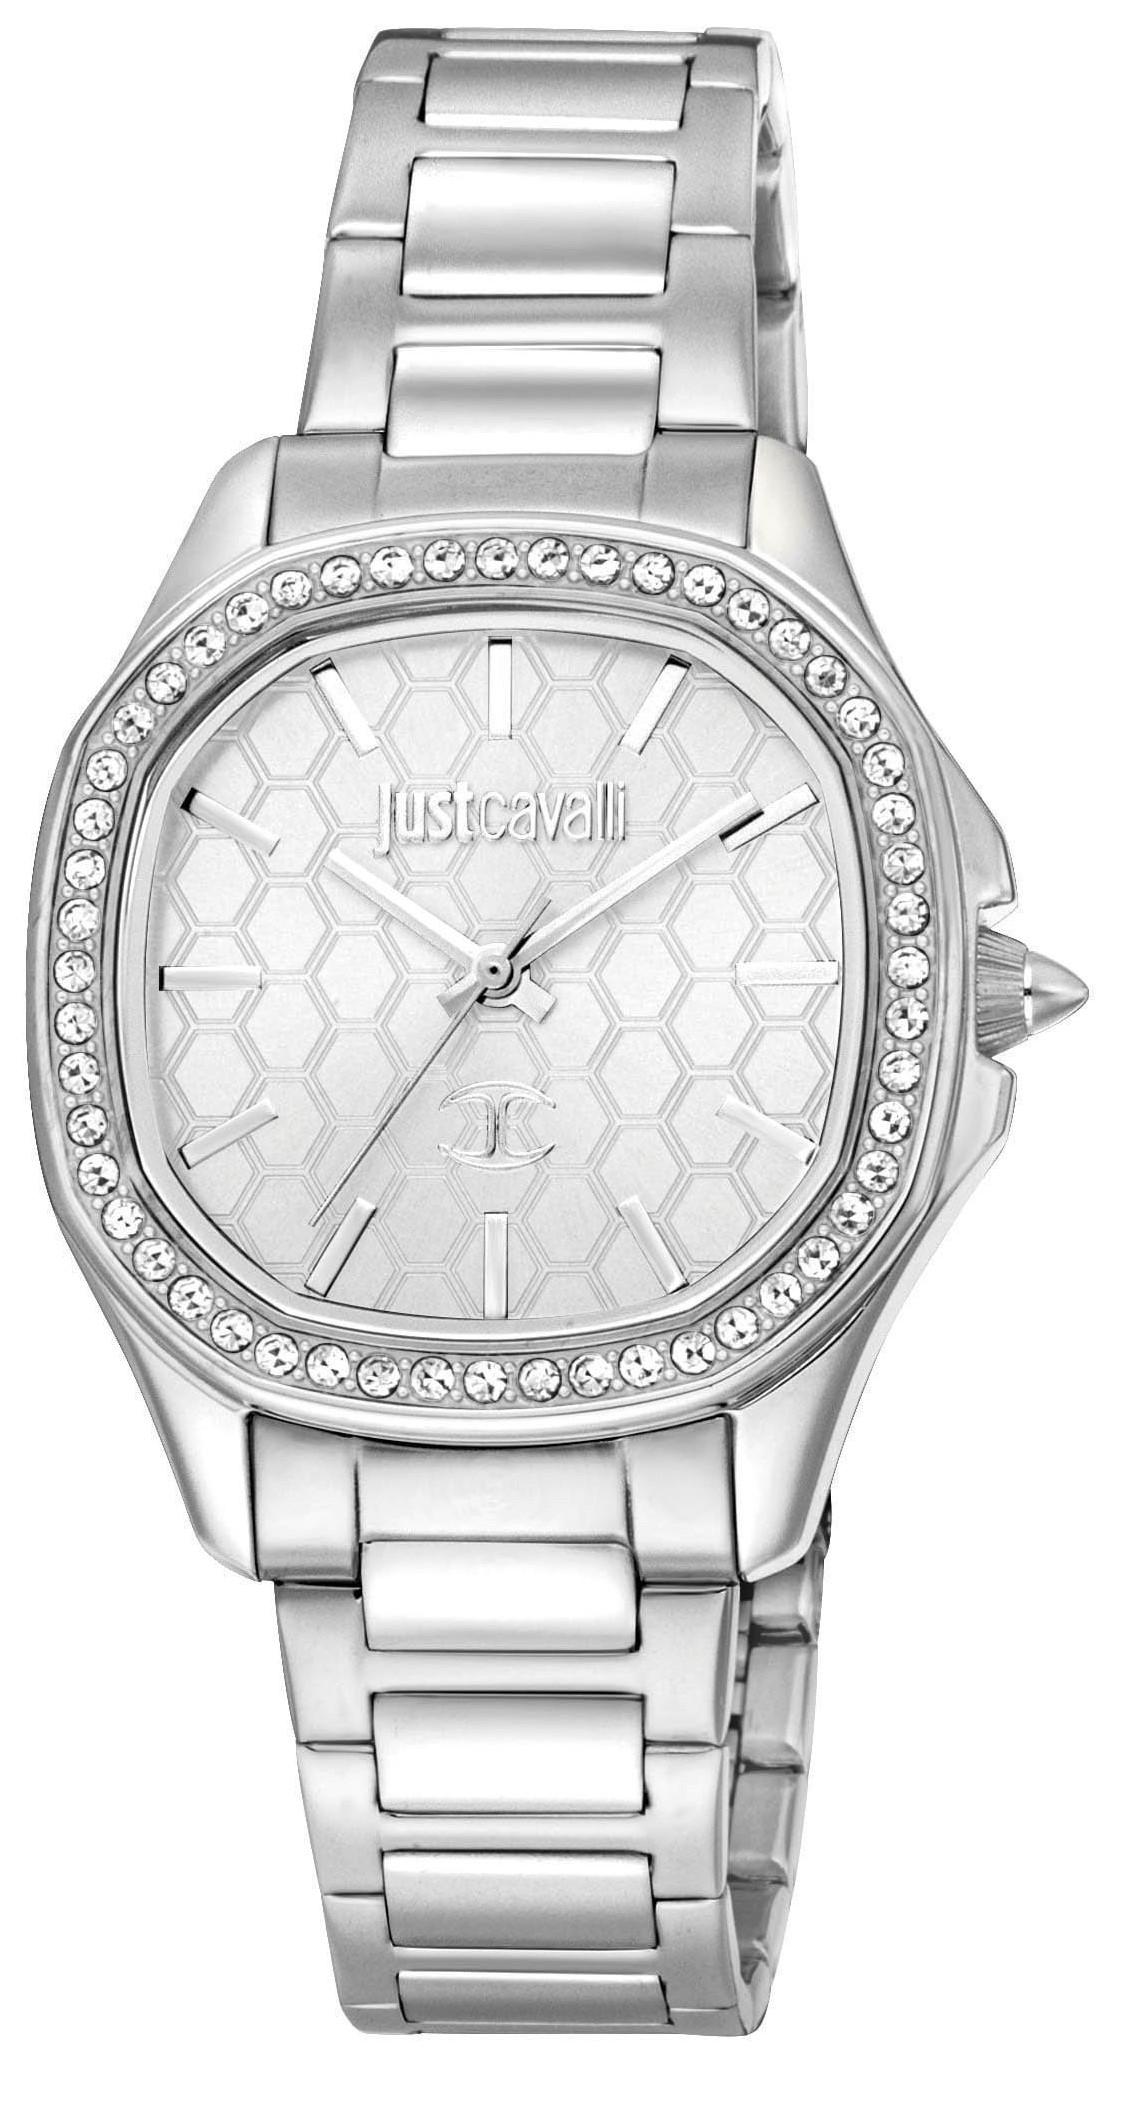 JUST CAVALLI Quadro - JC1L263M0045, Silver case with Stainless Steel Bracelet